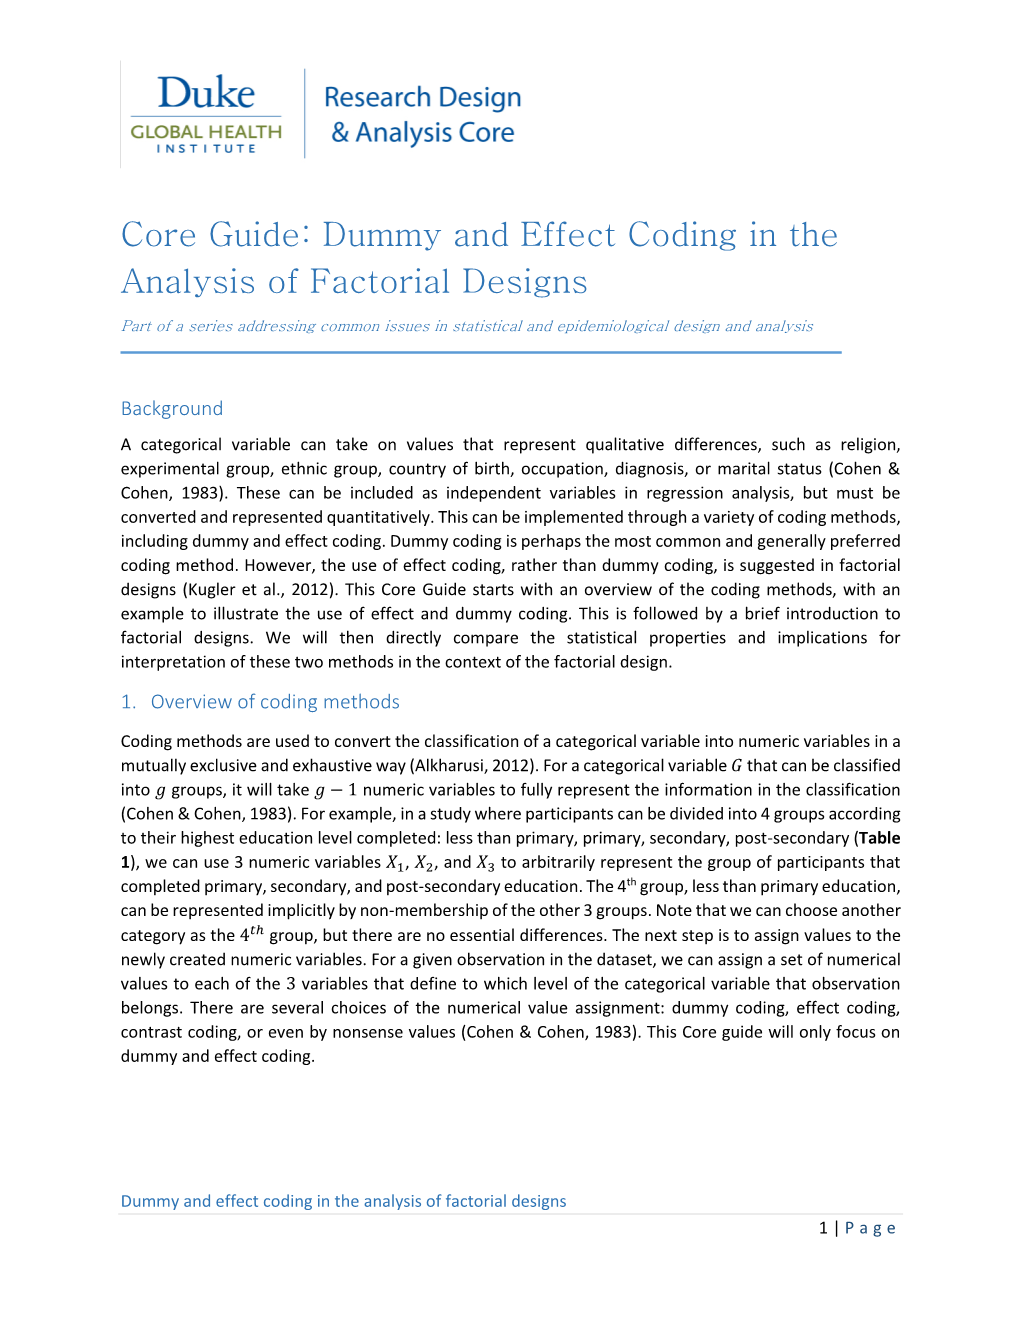 Dummy and Effect Coding in the Analysis of Factorial Designs